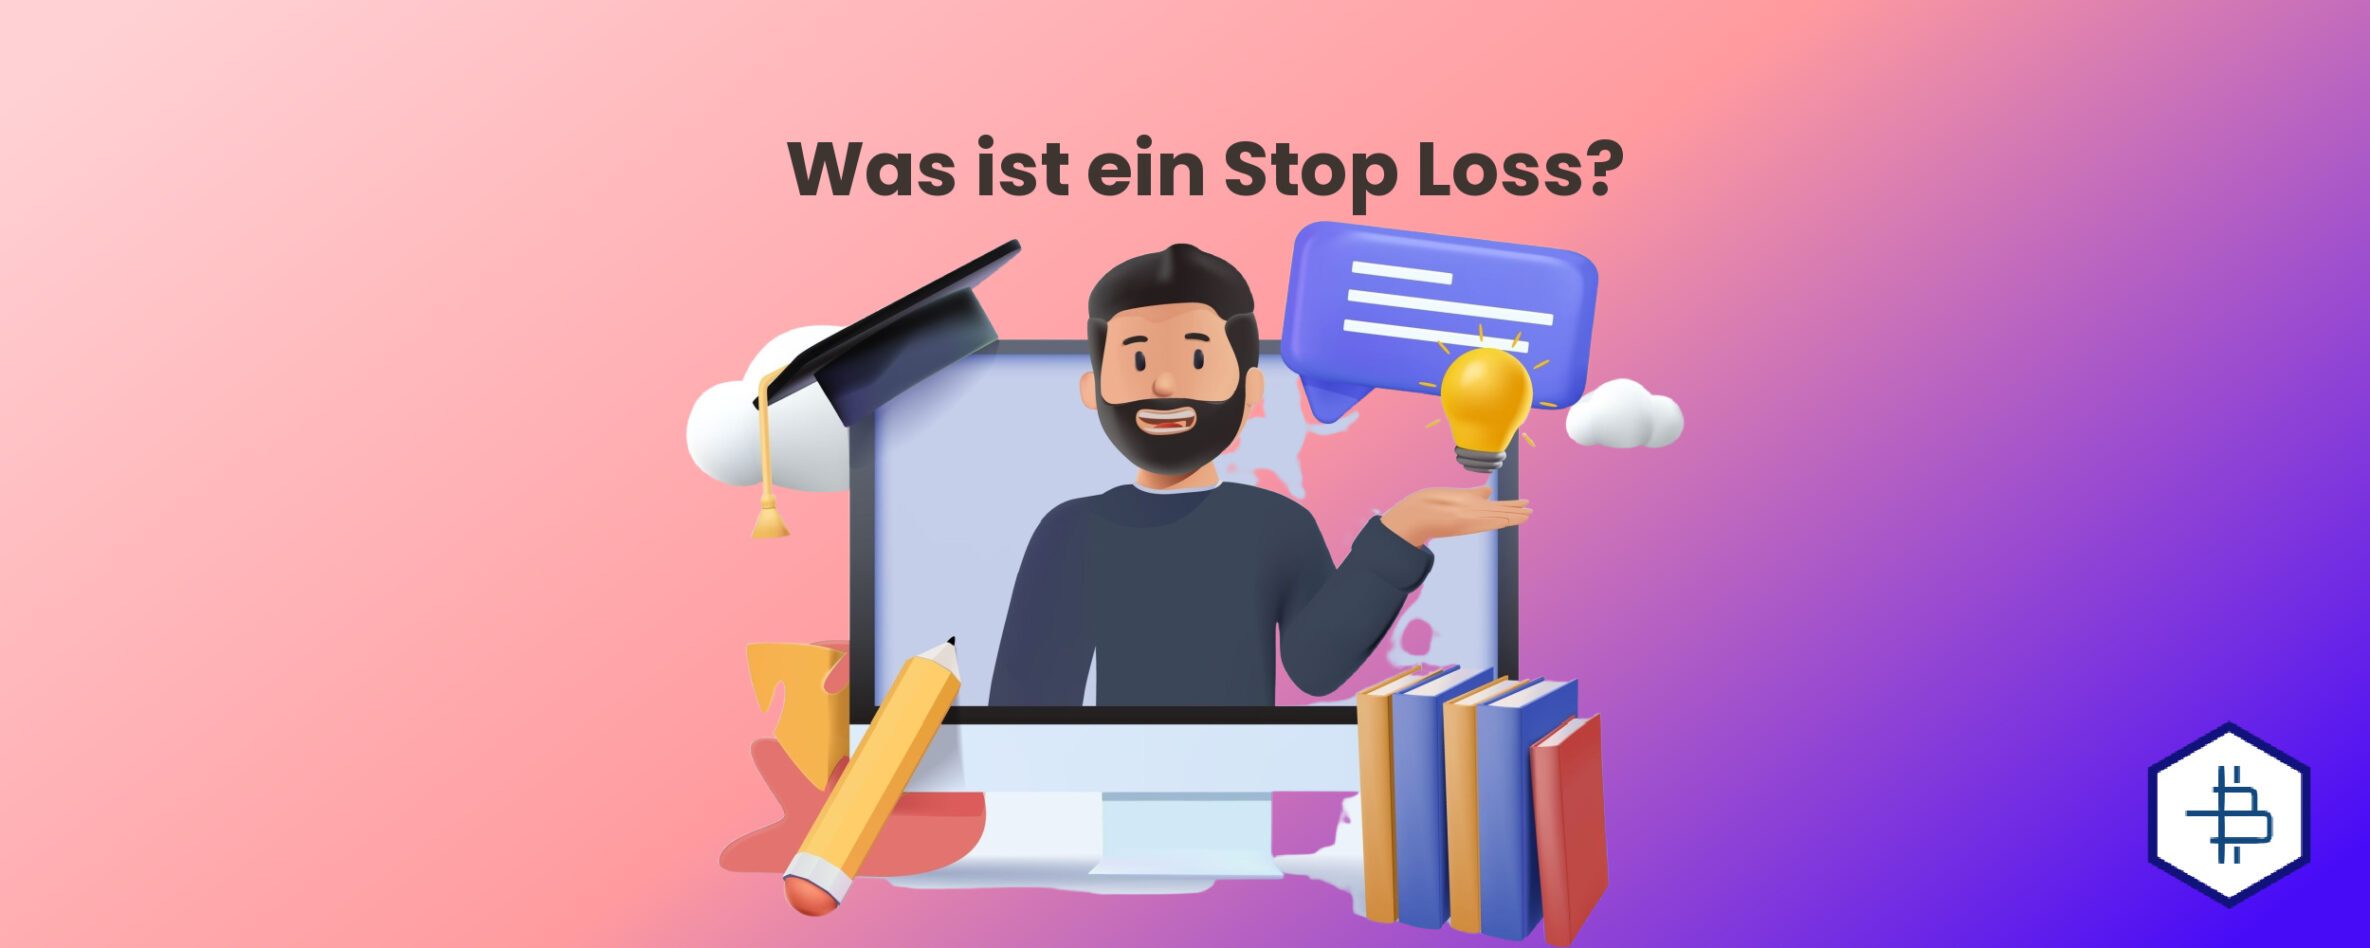 Stop Loss Was ist das